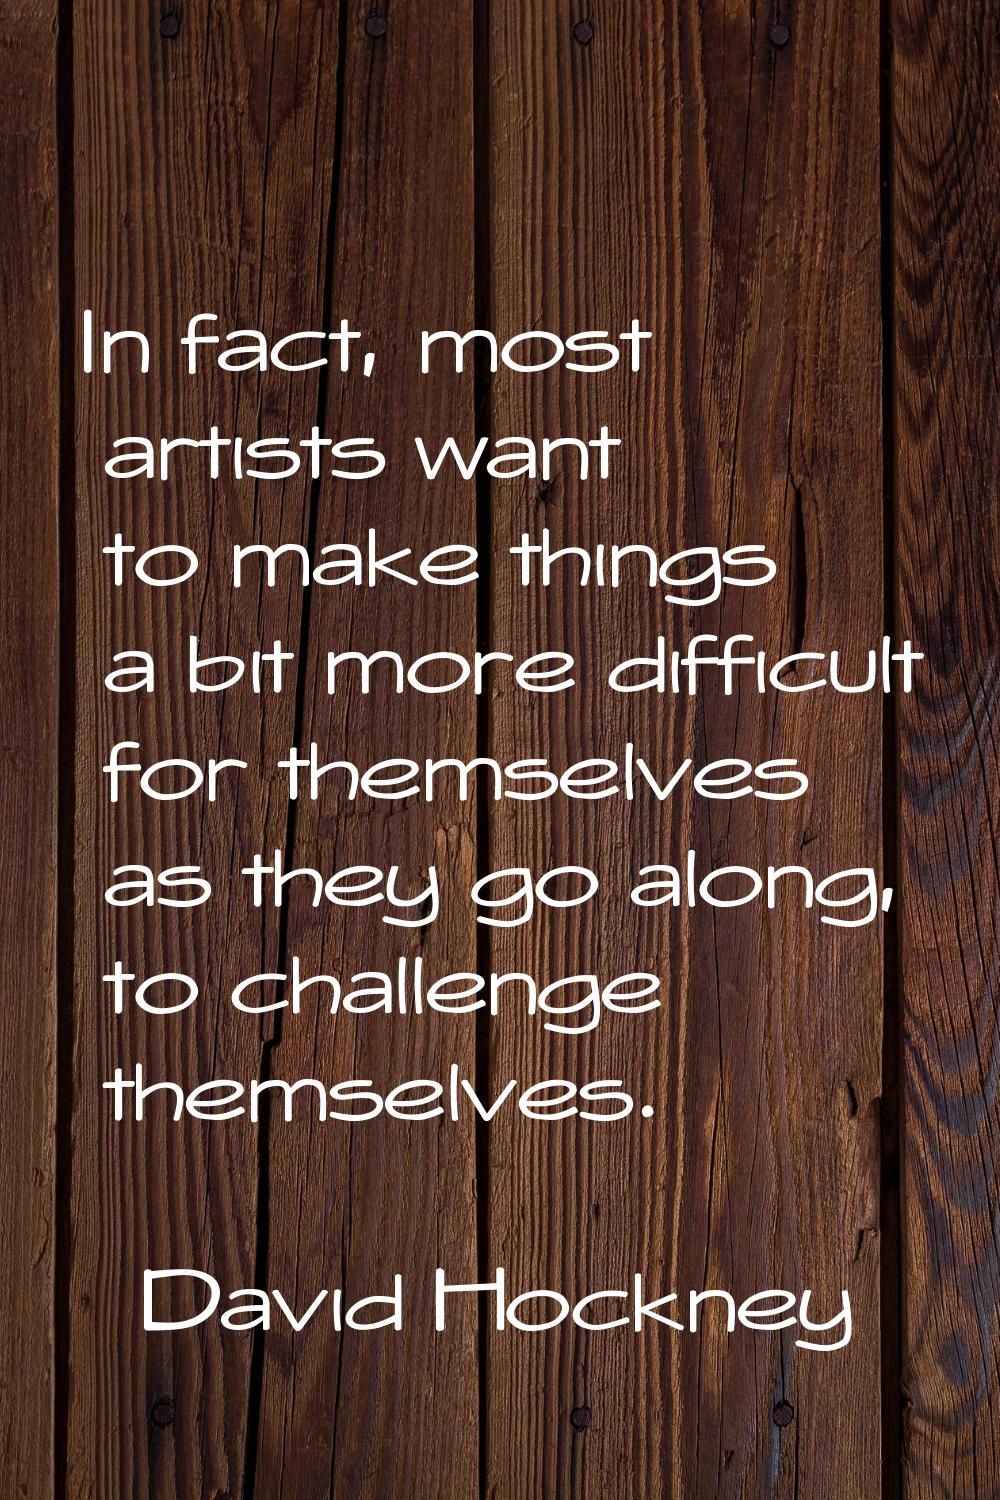 In fact, most artists want to make things a bit more difficult for themselves as they go along, to 